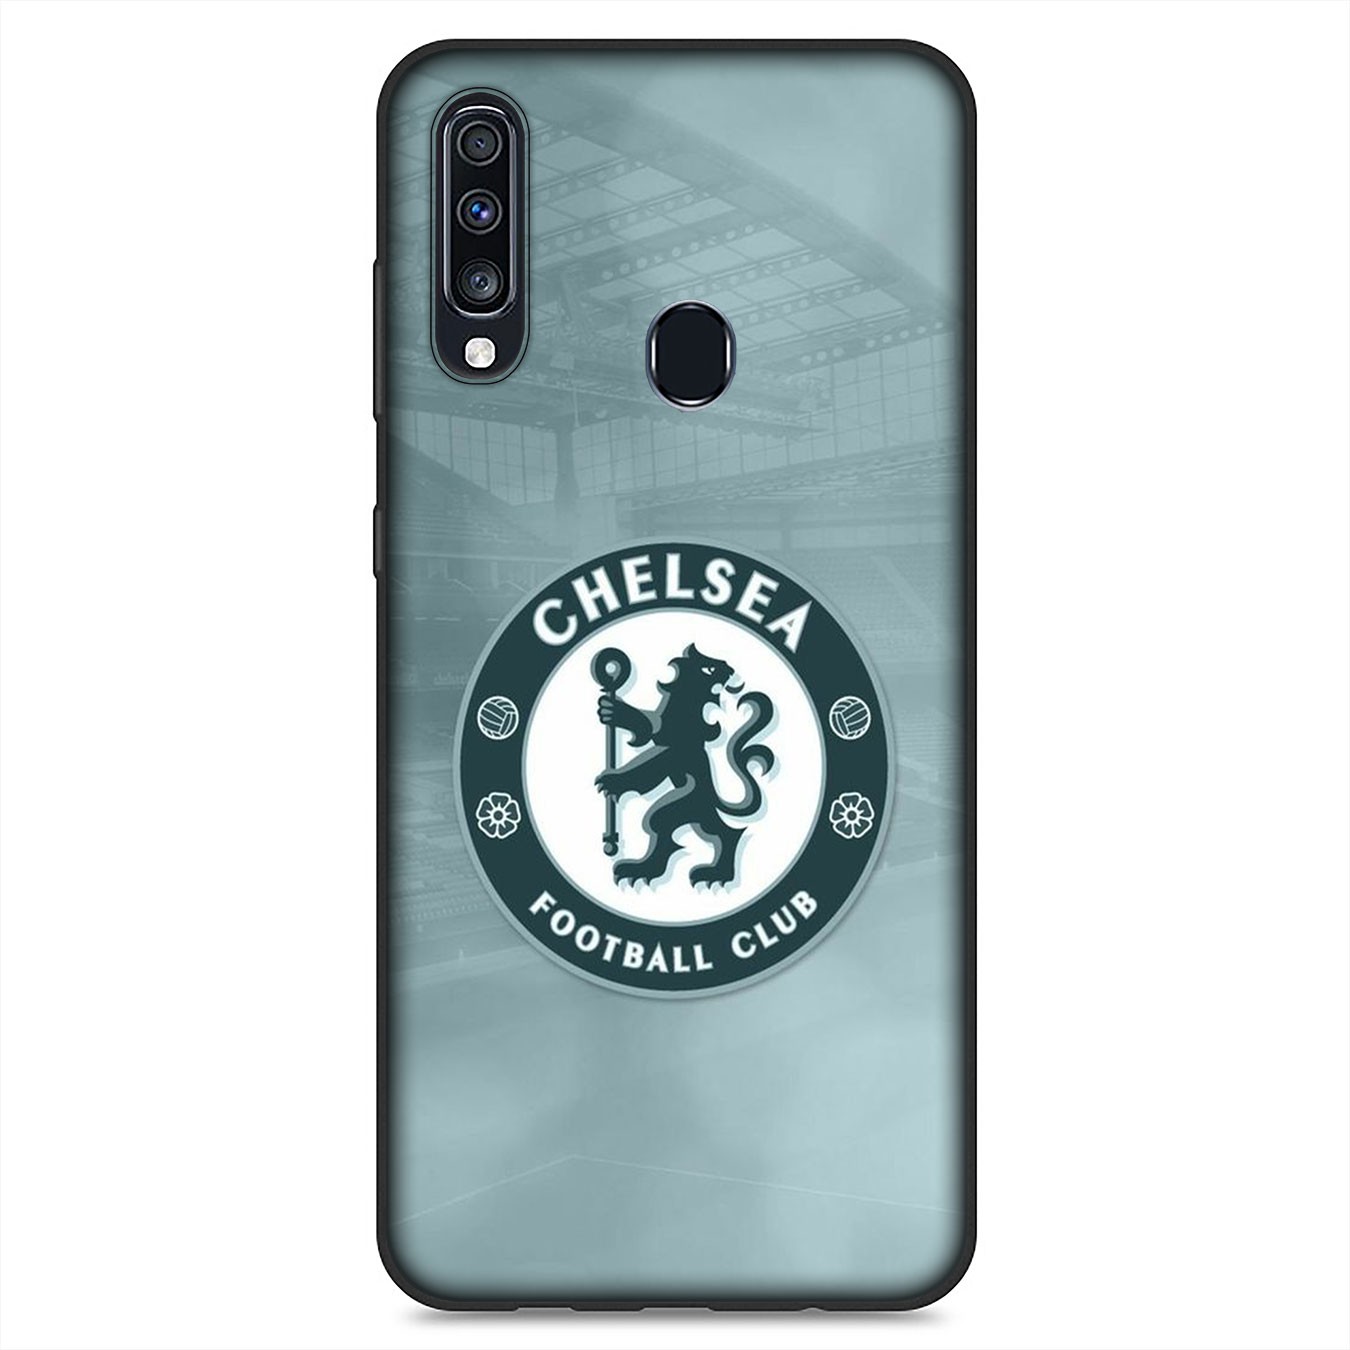 Samsung Galaxy S21 Ultra S8 Plus F62 M62 A2 A32 A52 A72 S21+ S8+ S21Plus Casing Soft Silicone Phone Case Chelsea Football Cover